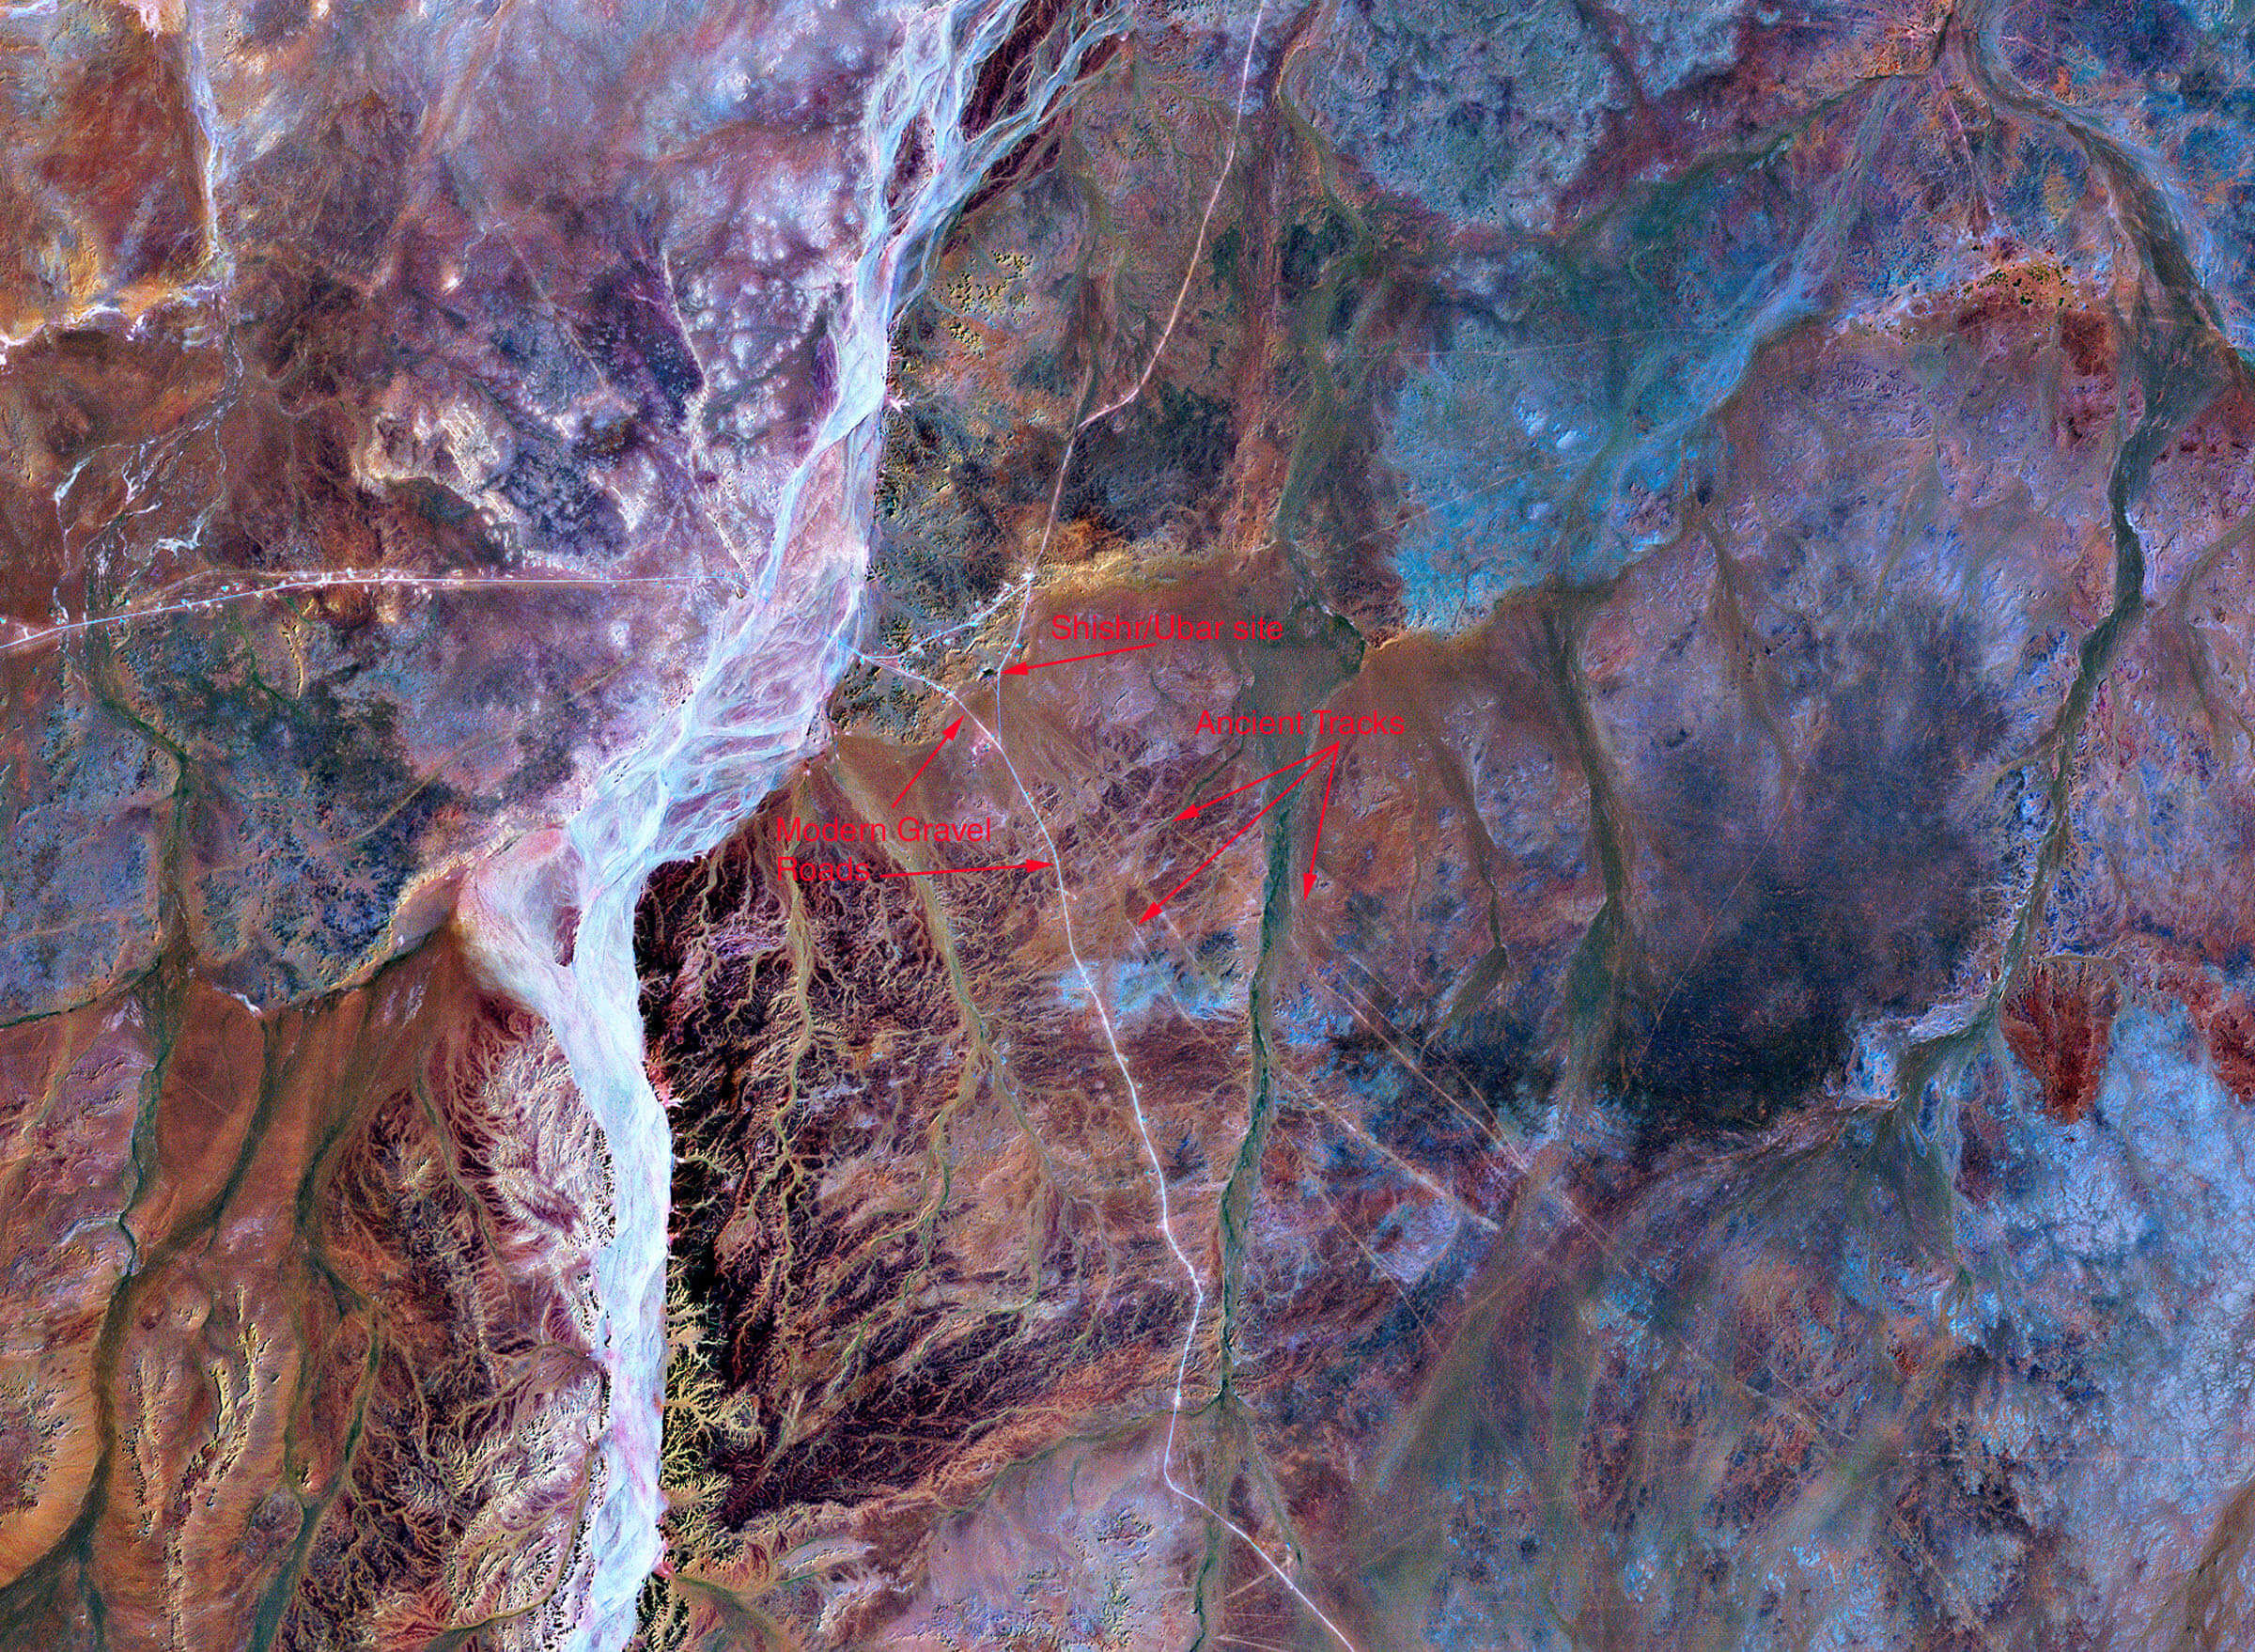 Modern and ancient roads in Oman, as photographed by a Landsat series satellite. Photo: NASA/USGS.